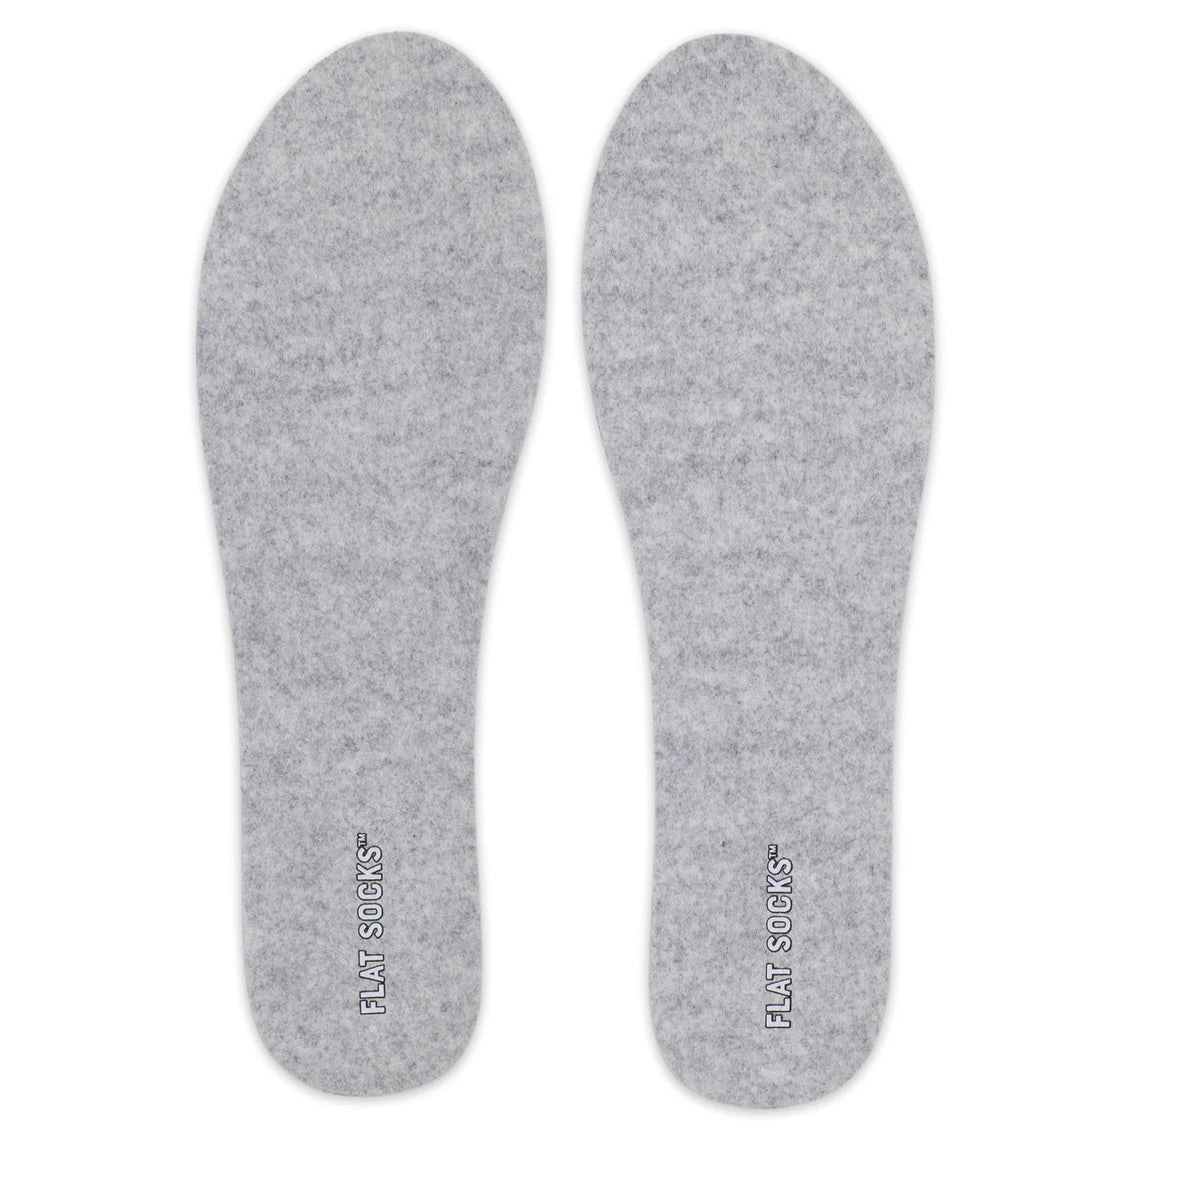 A pair of FLAT SOCKS LIGHT GREY MICRO WOOL - WOMENS with the text &quot;felt so soft soles&quot; printed on them, designed for sock-free use, displayed on a white background by FLAT SOCKS.